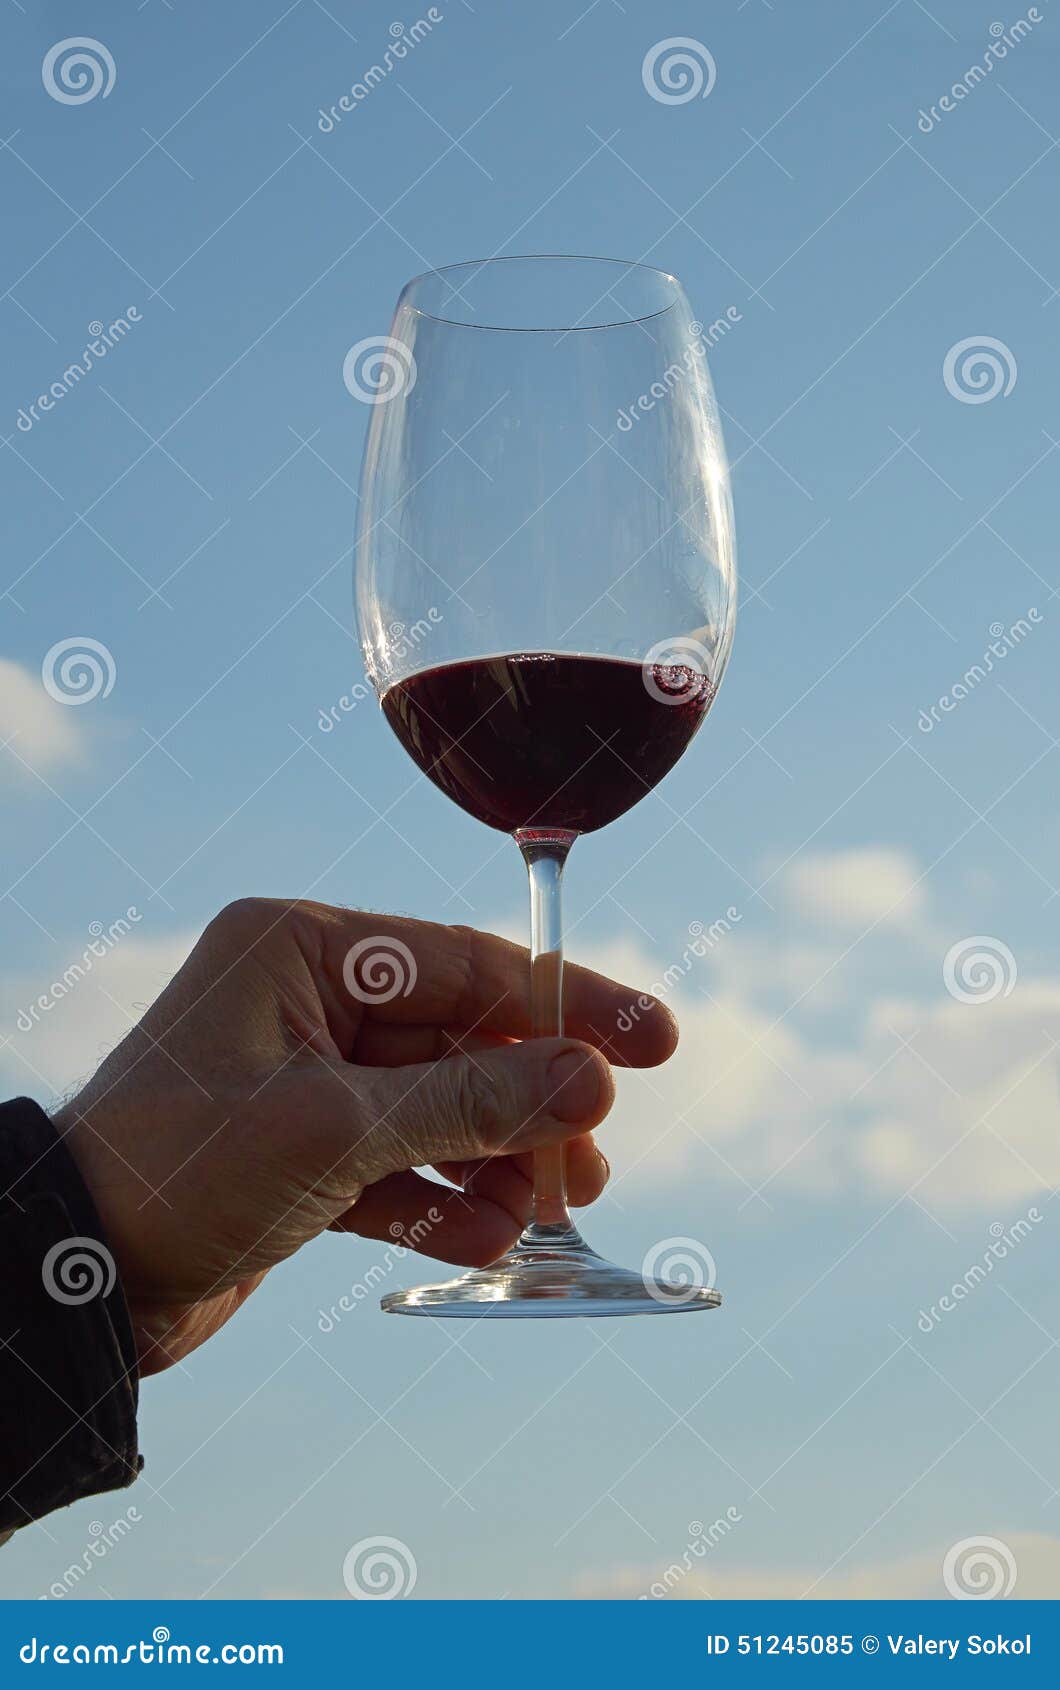 Wine glass against the blue sky.